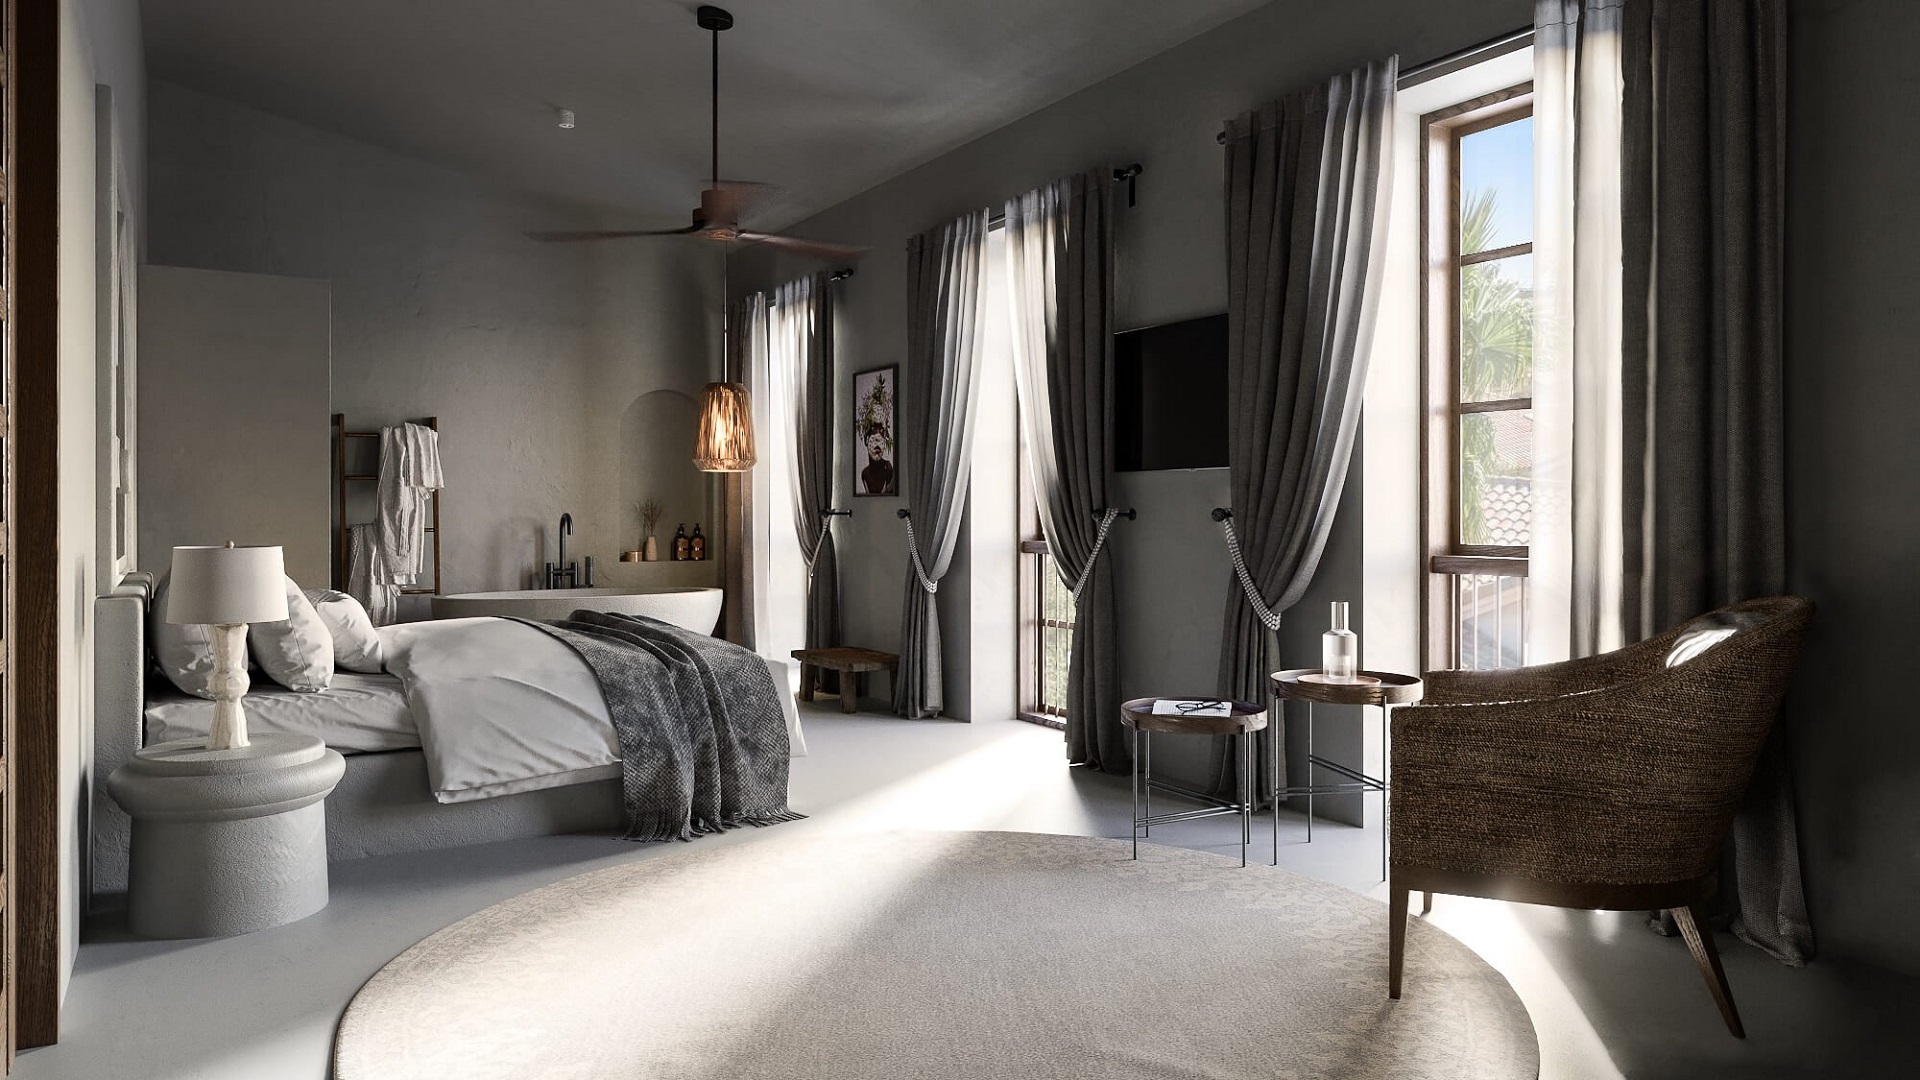 3D Architectural Rendering of a Bedroom